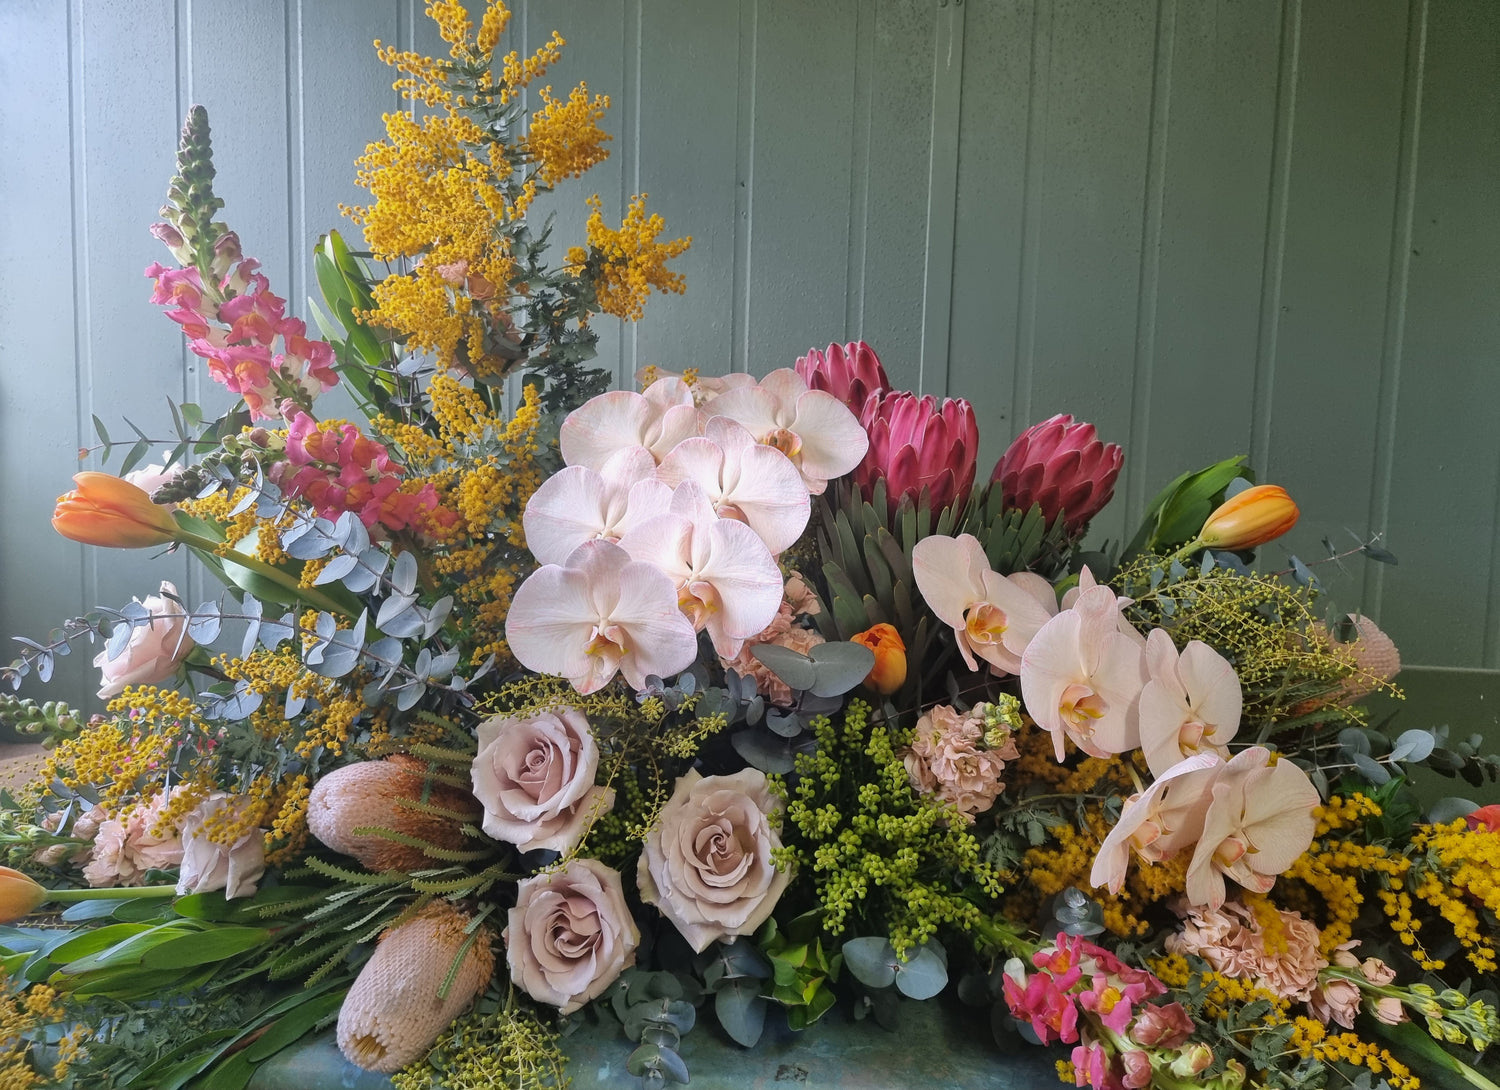 Sunshine Coast Funeral Flowers, Casket Flowers and Sympathy Flowers. Buderim Florist can take care of all your funeral flowers for you. 